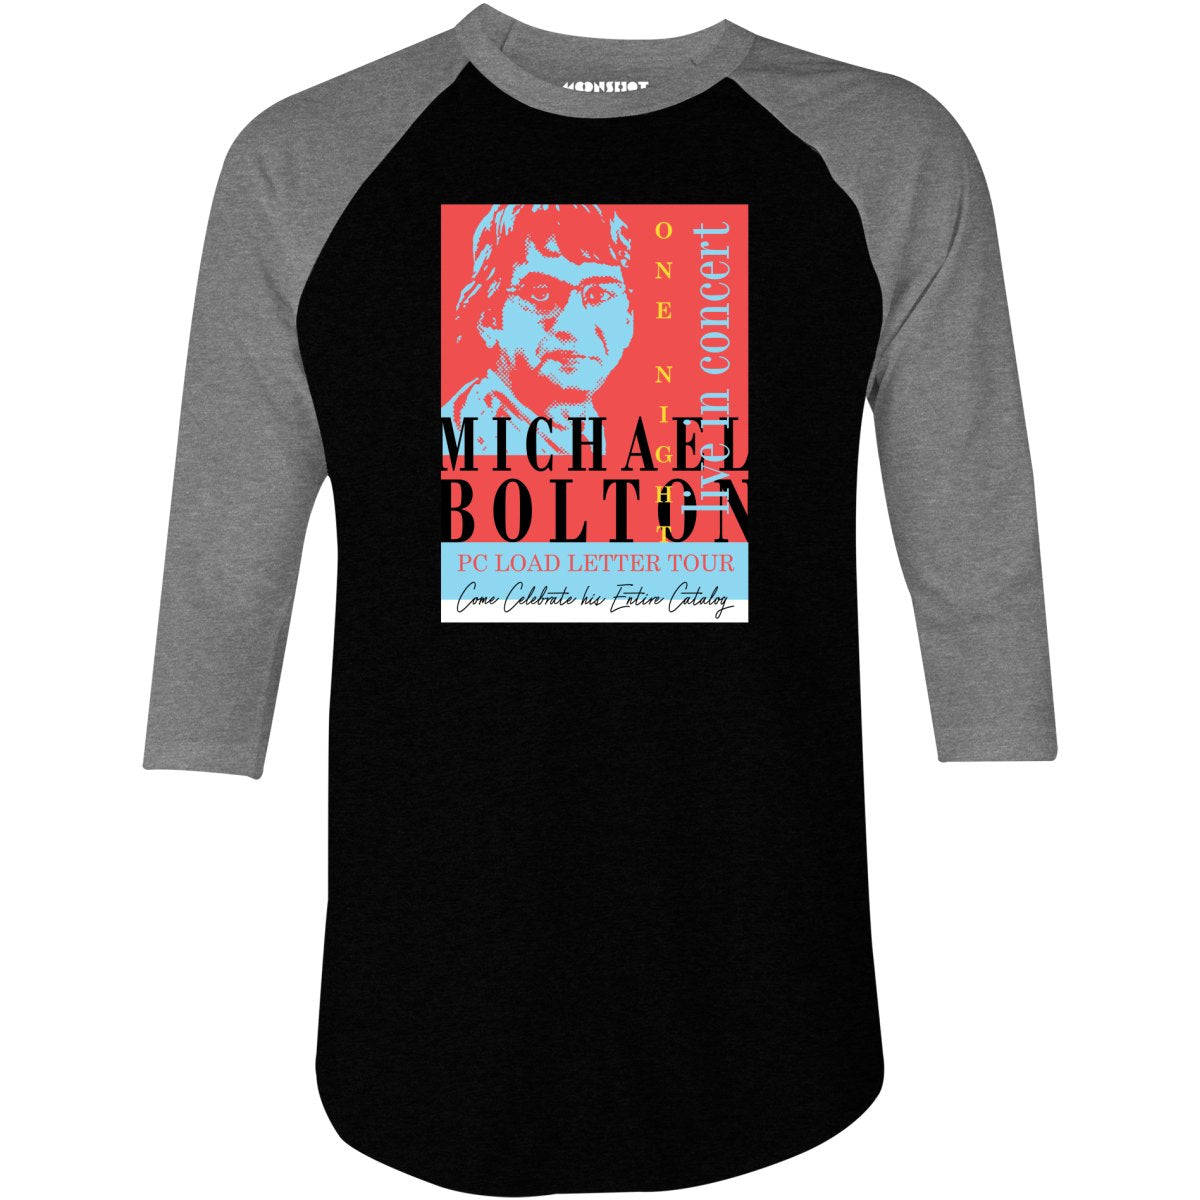 Michael Bolton in Concert Office Space - 3/4 Sleeve Raglan T-Shirt